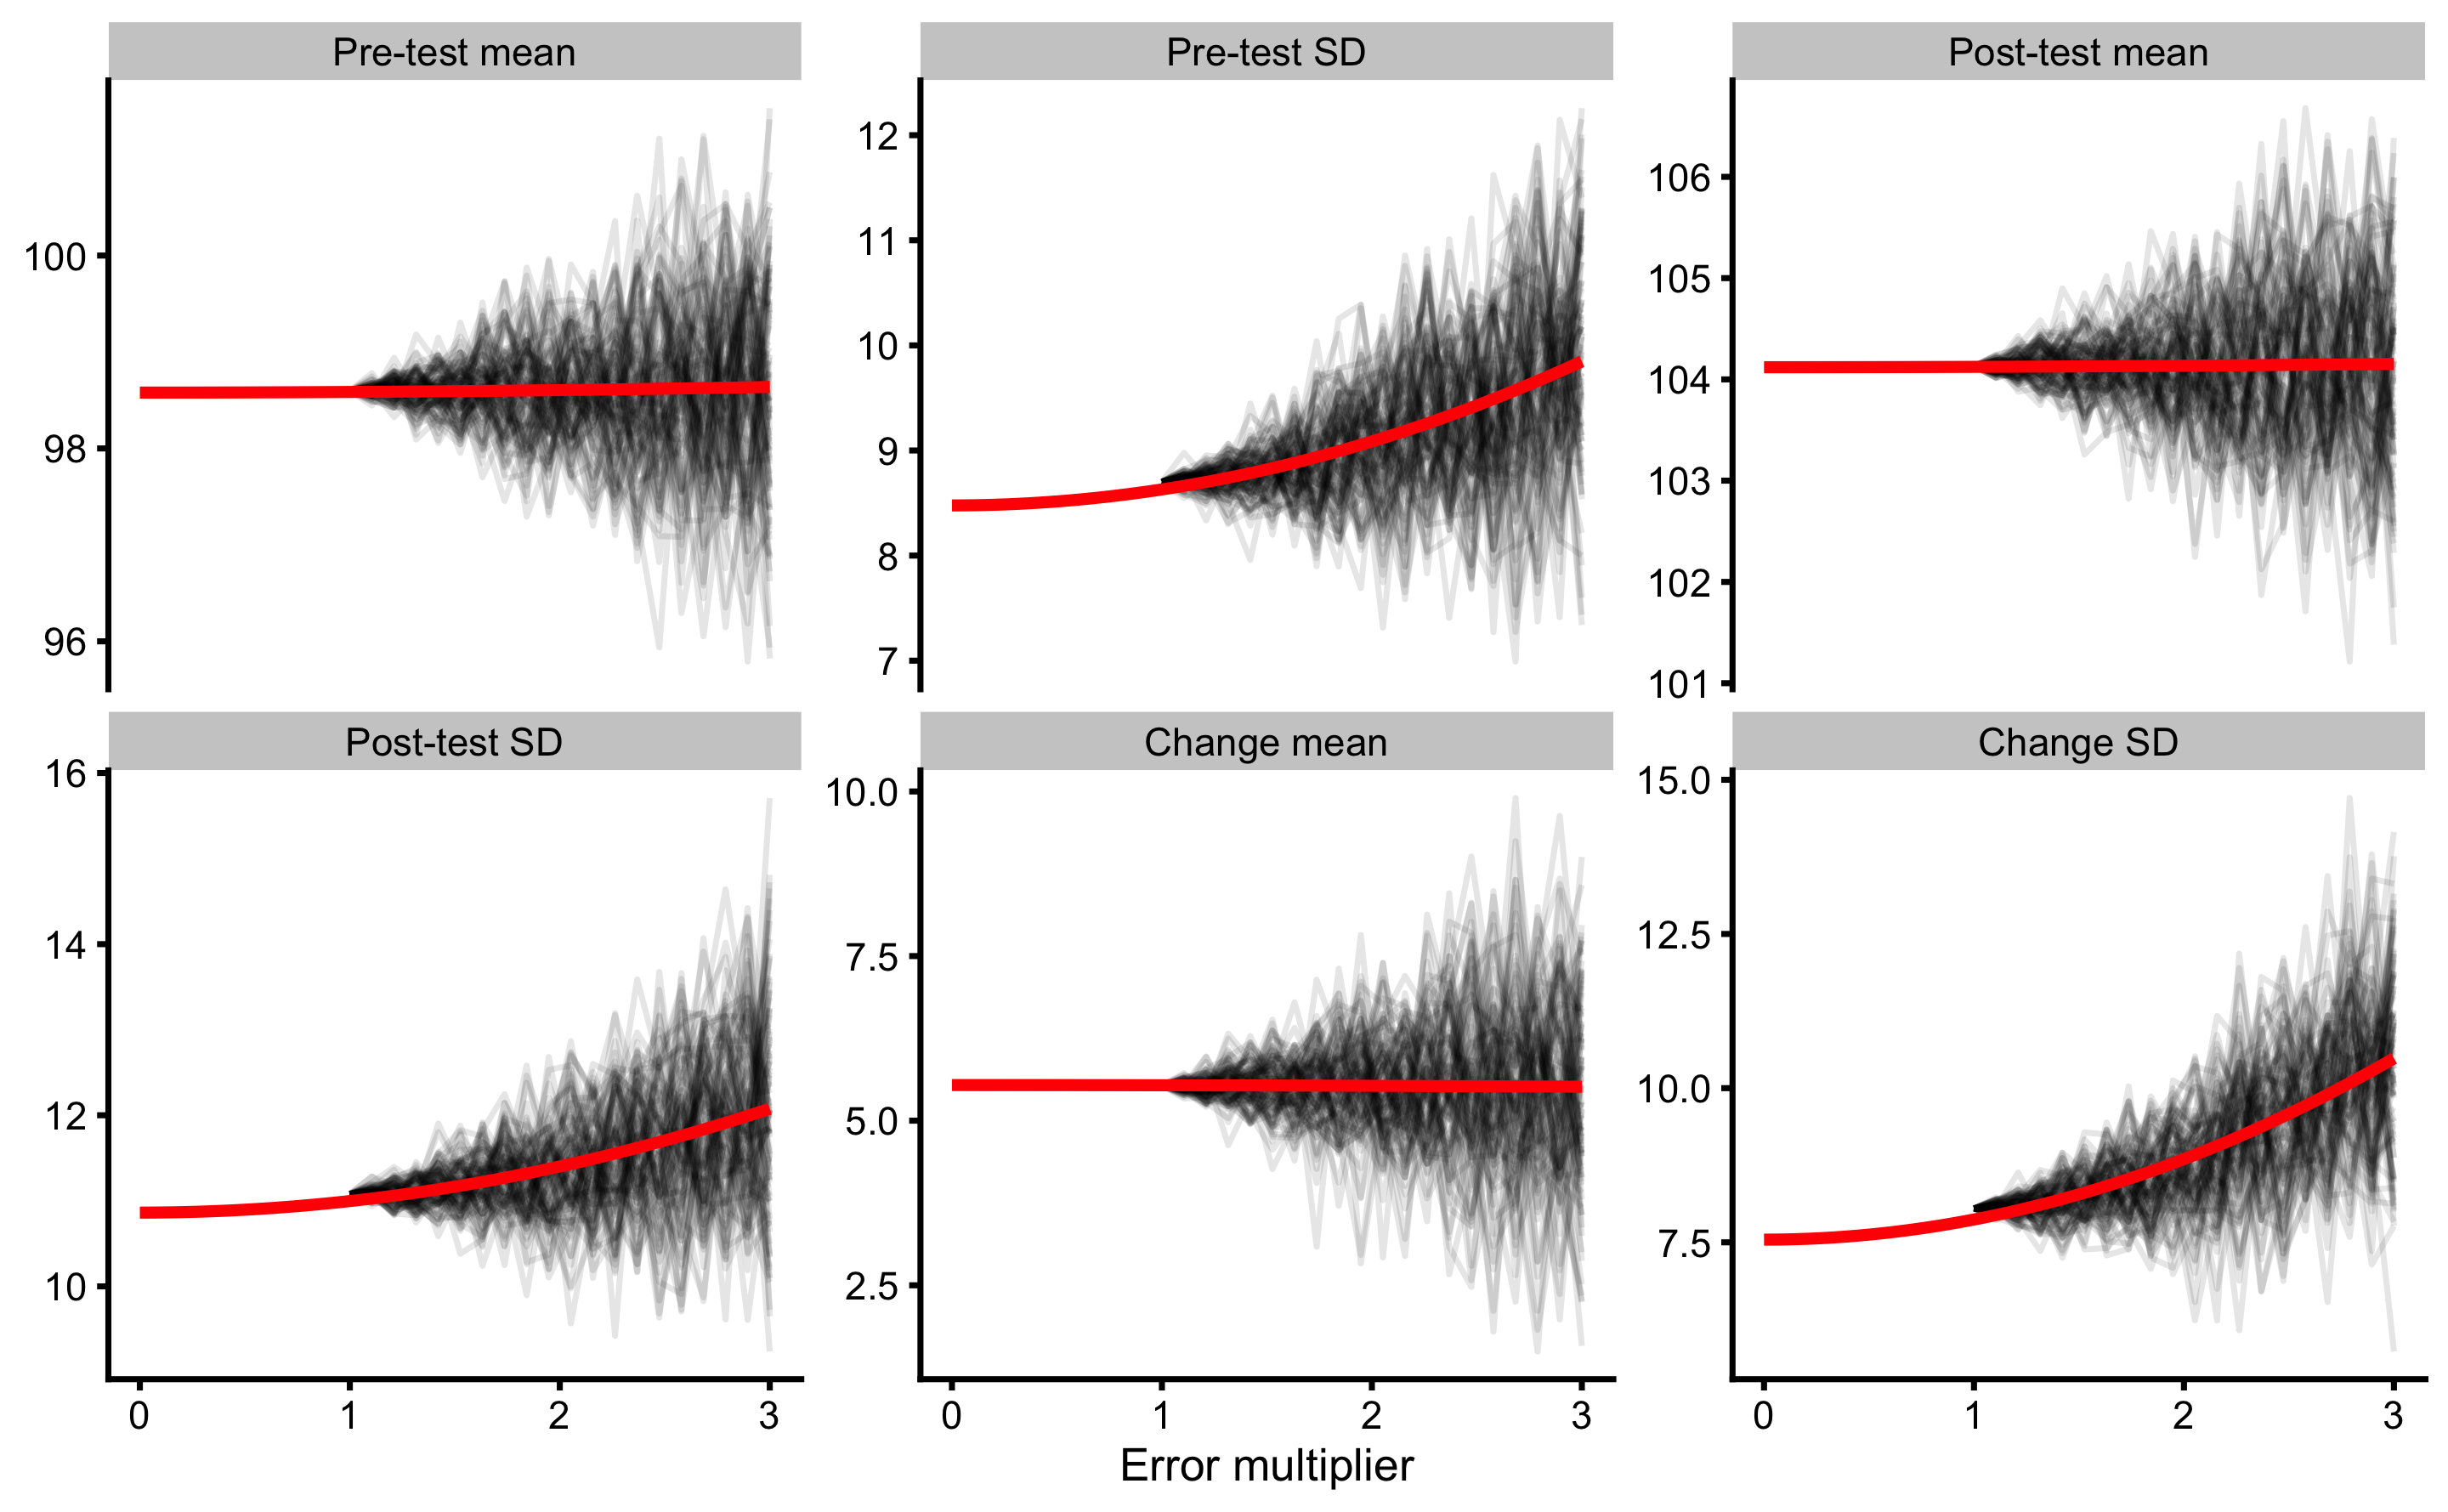 Result of SIMEX using 100 simulations and addition quadratic extrapolation. Red line represents quadratic fit, extrapolated to error multiplier of 0 to estimate estimator value when there is no measurement error involved in the Pre-test and Post-test variables